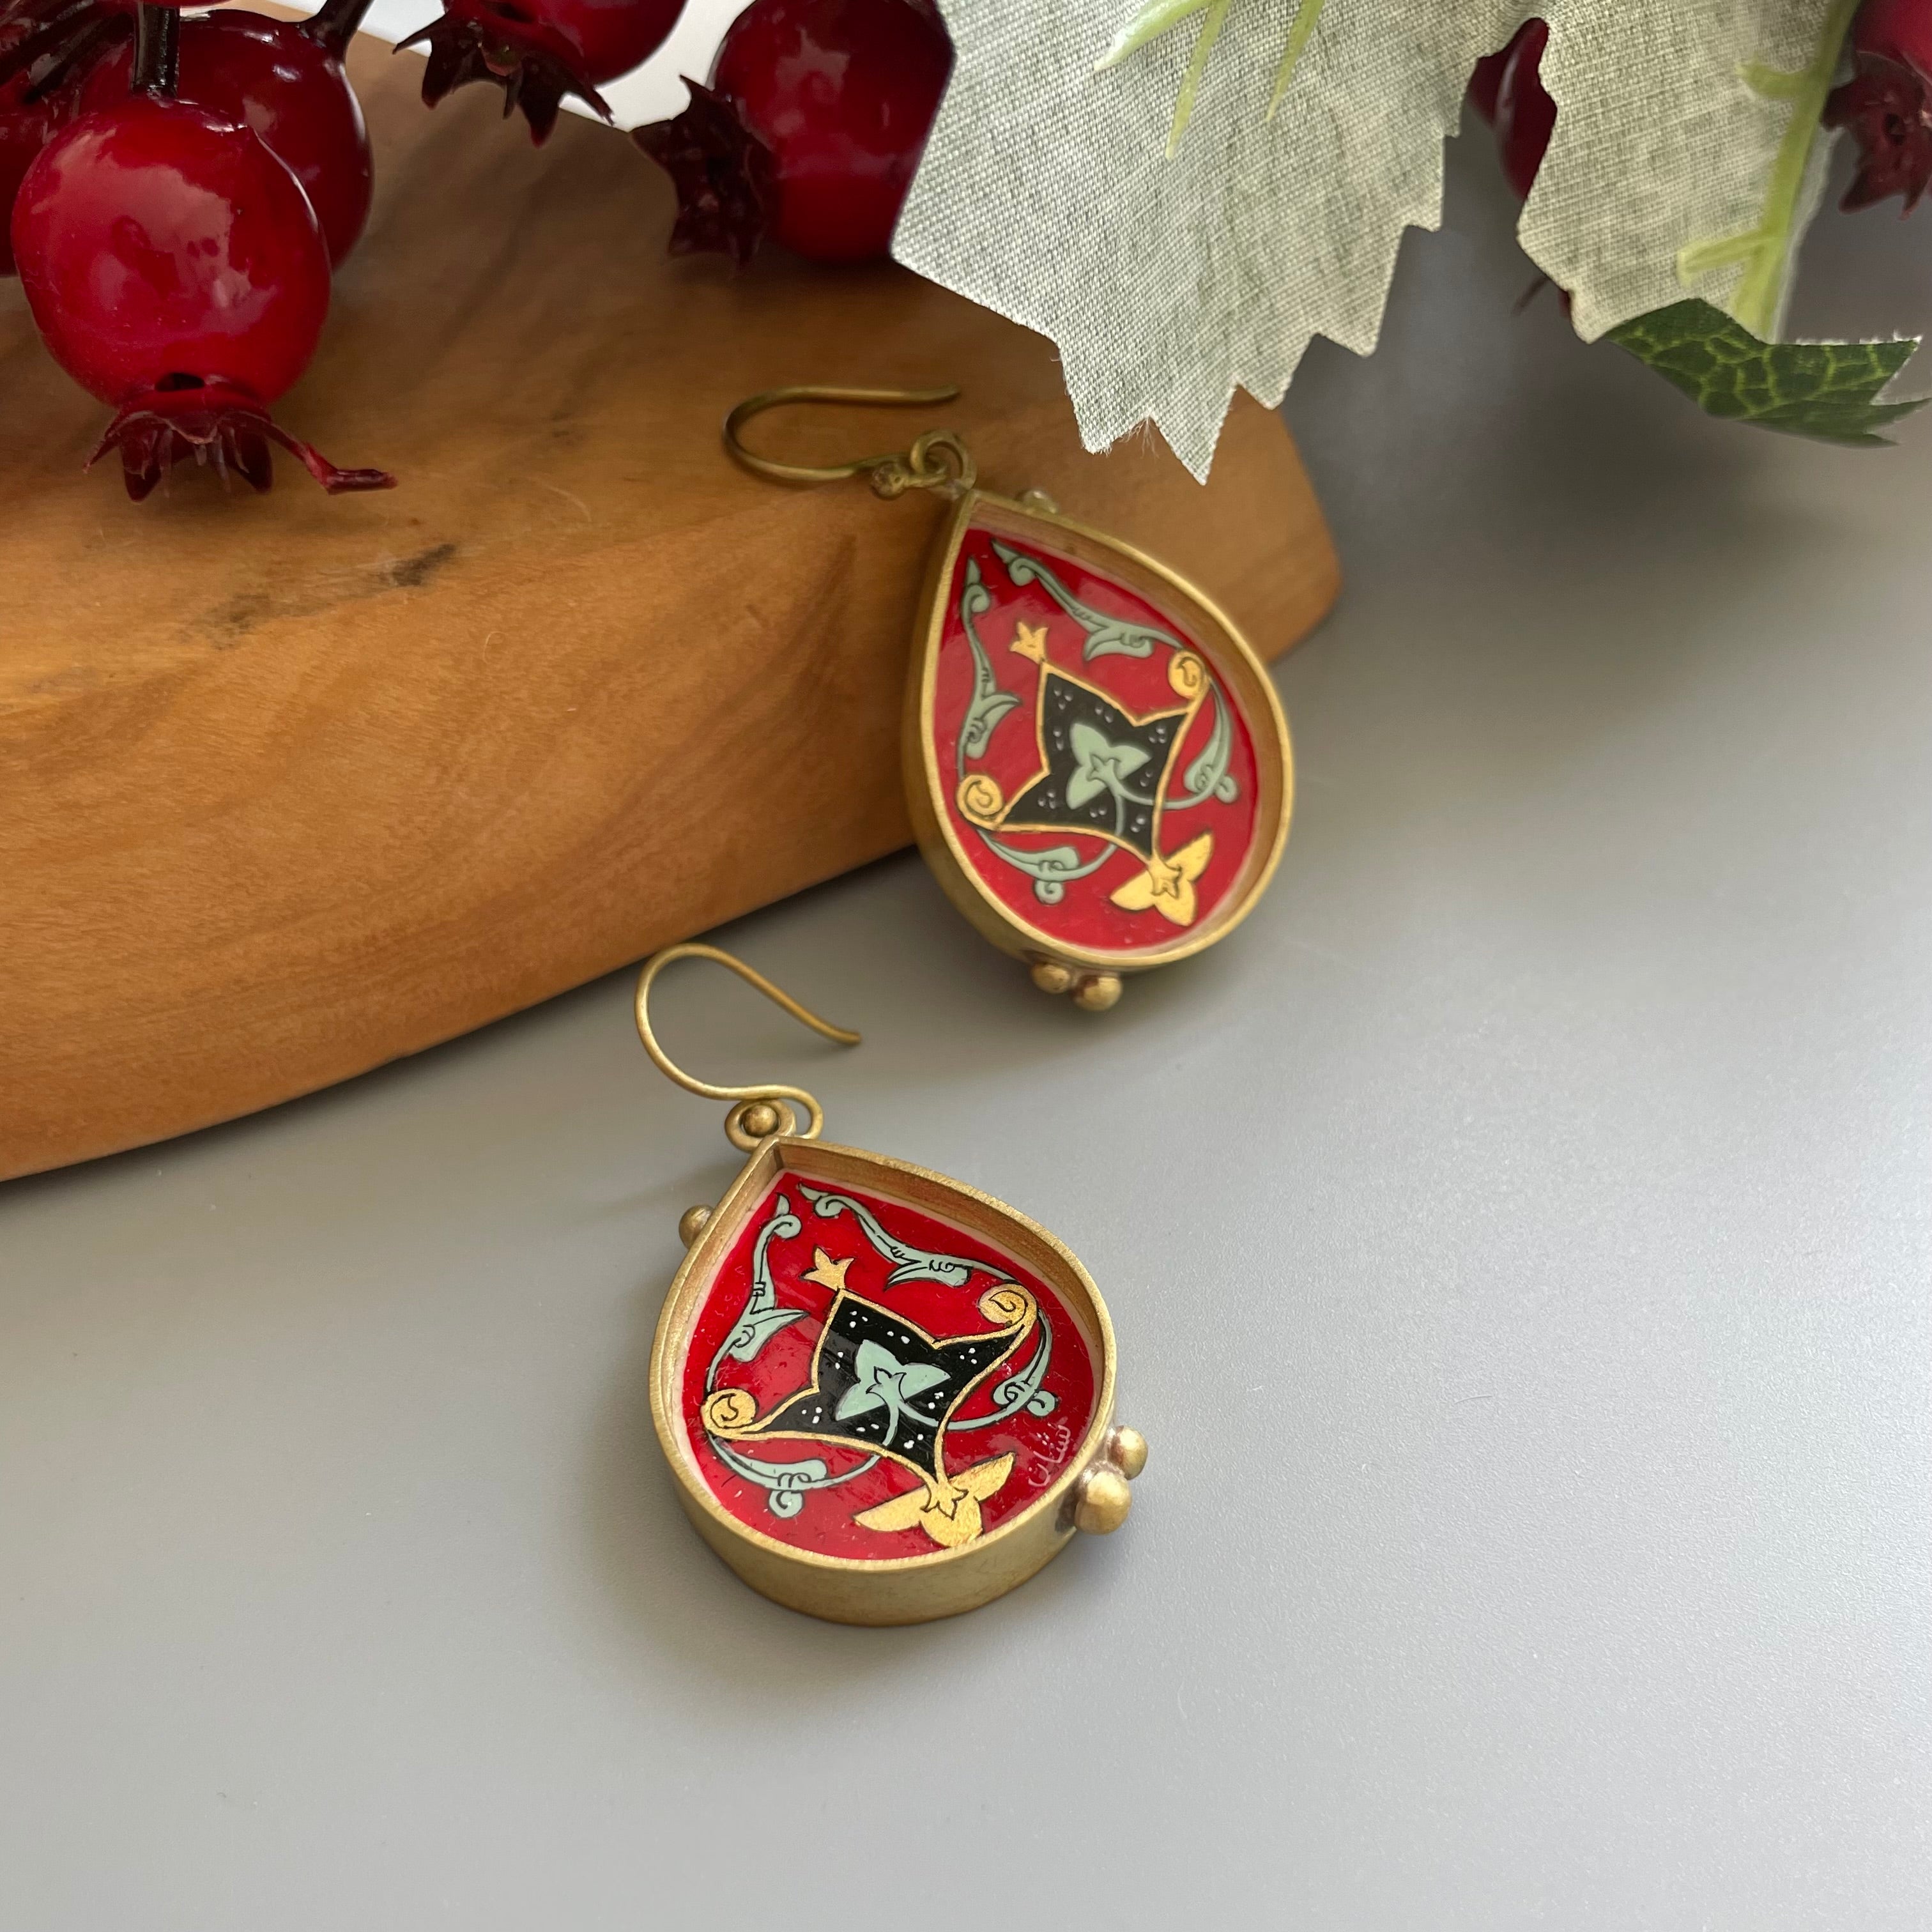 Fully Hand Painted Persian Earrings in Red with Eslimi Design